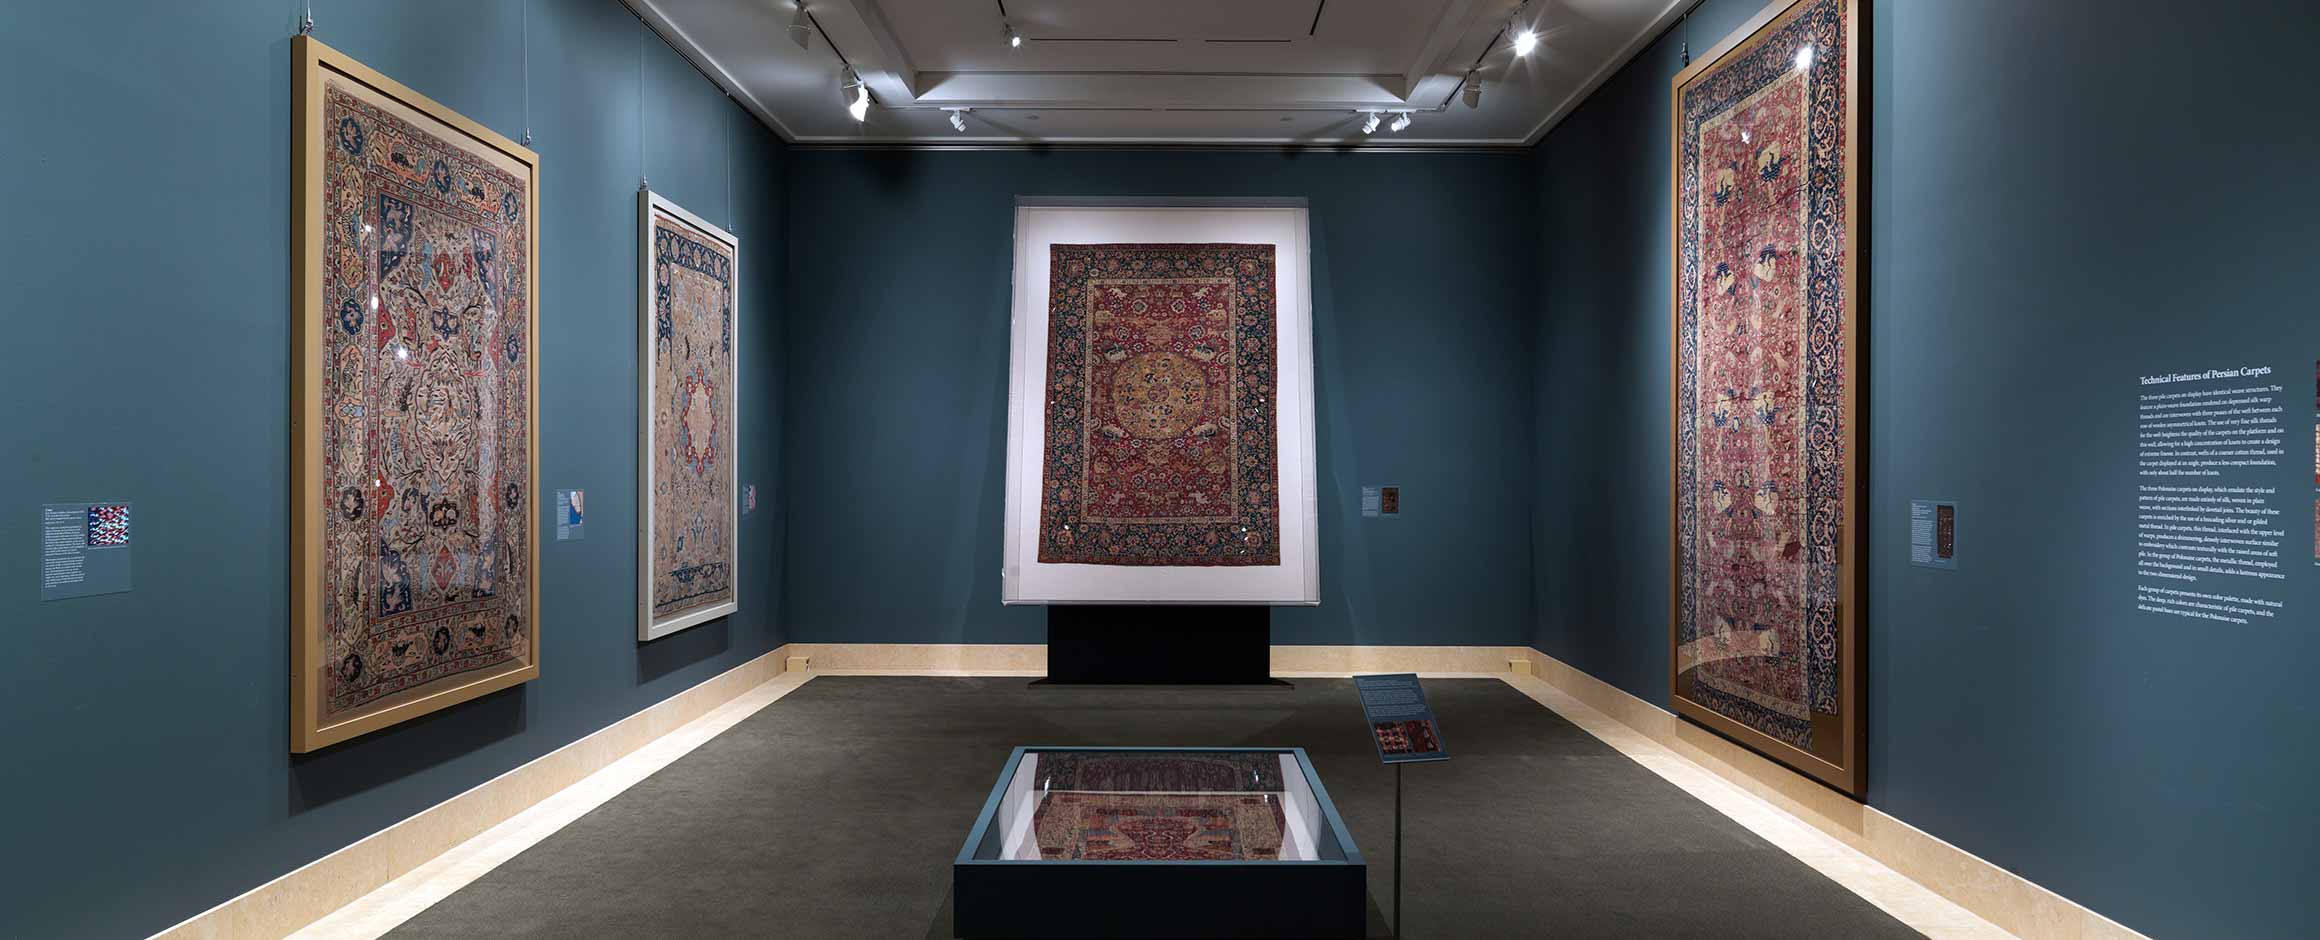 Installation view of "Carpets for Kings: Six Masterpieces of Iranian Weaving" with four large-scale carpets hung on dark teal walls in a small room.